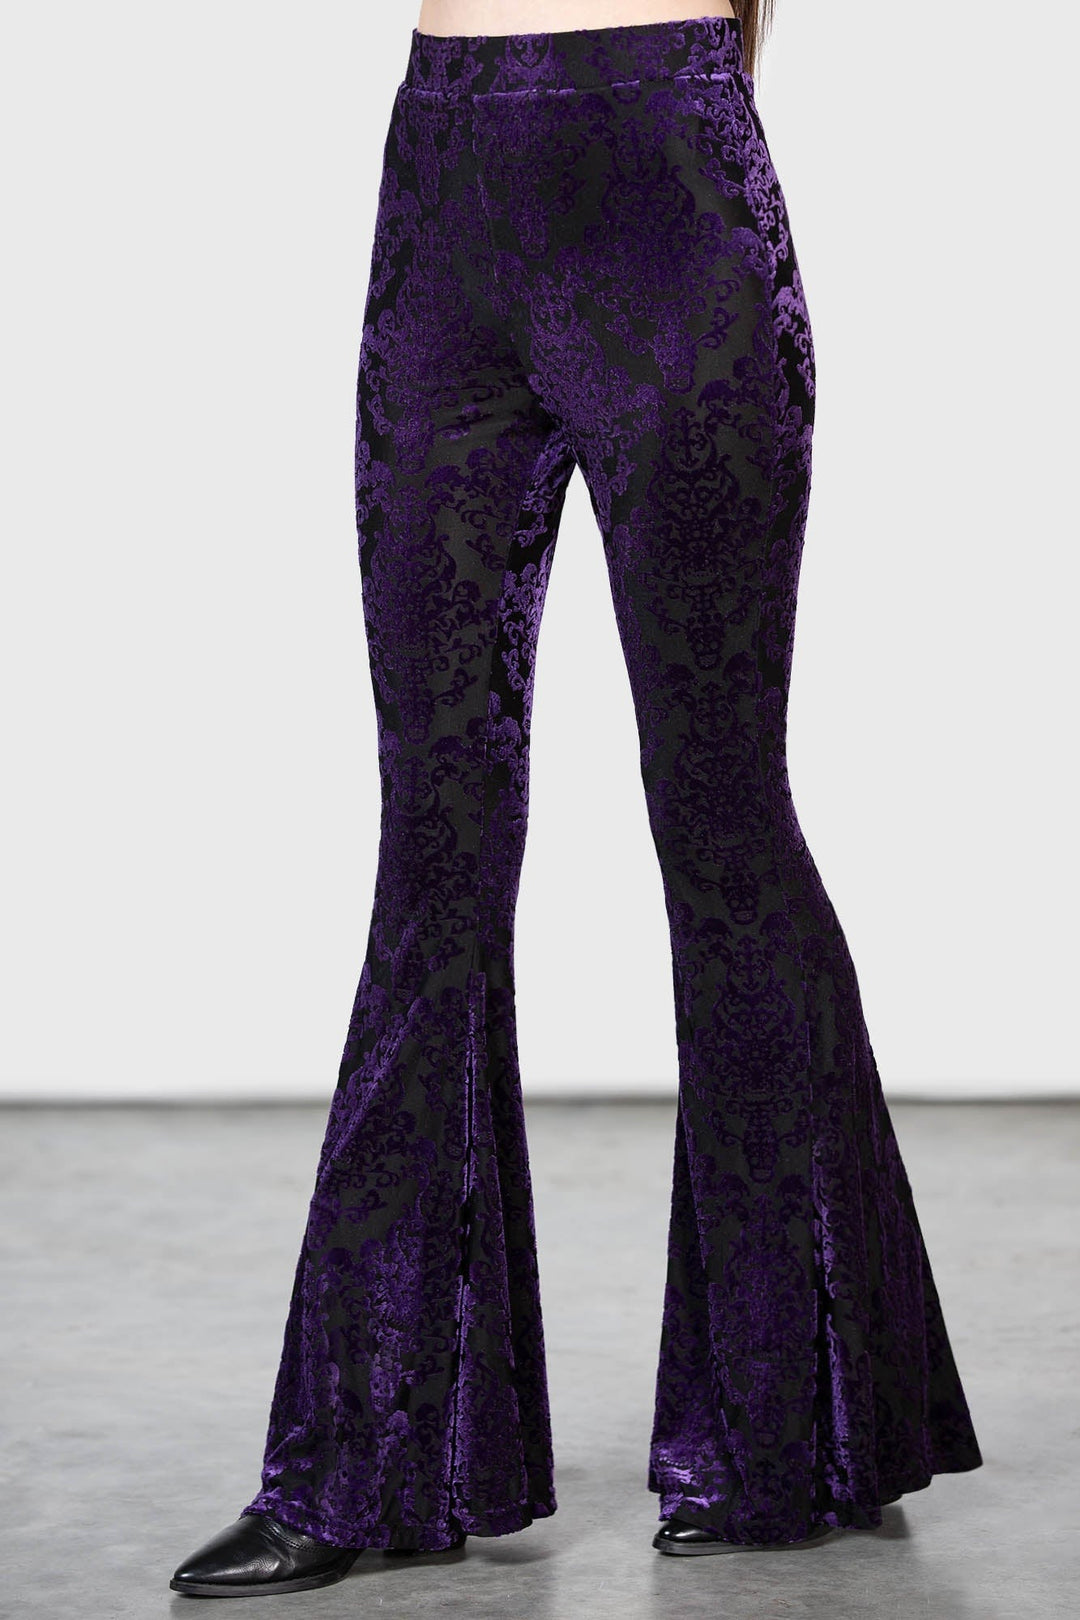 gothic purple high waisted flared pans for women